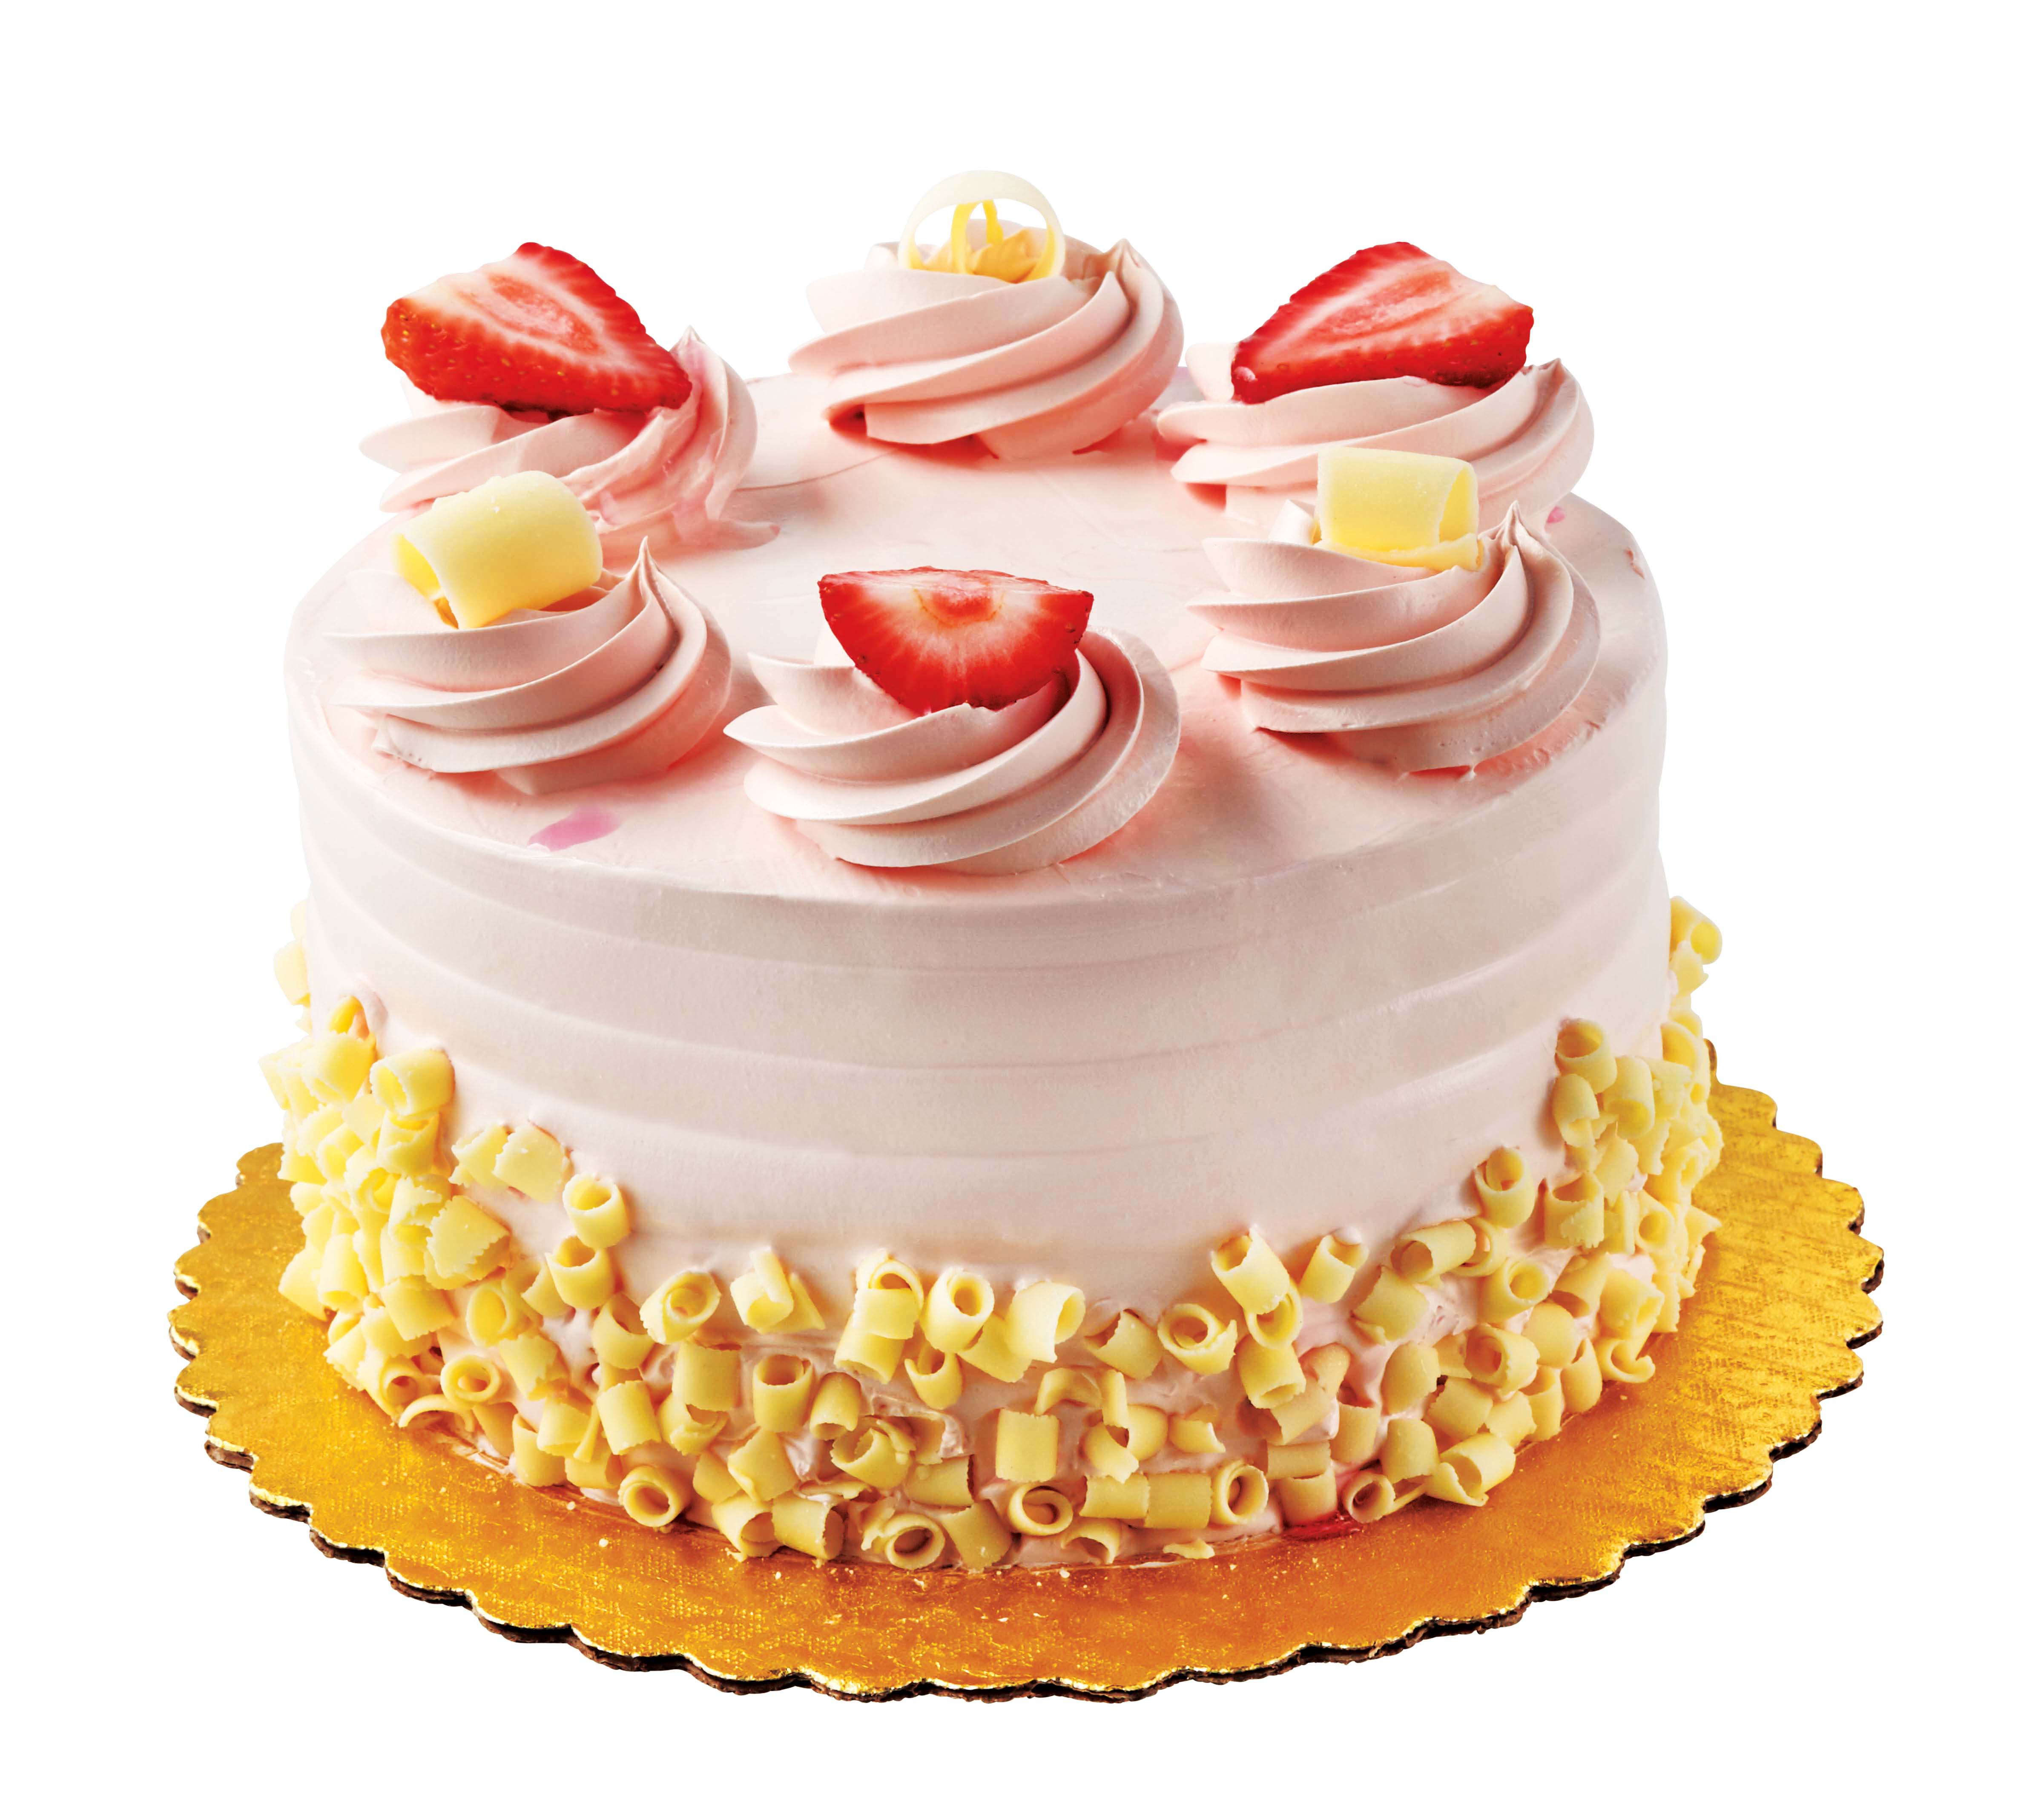 HEB White Cake with Strawberry Bettercreme Icing Shop Cakes at HEB